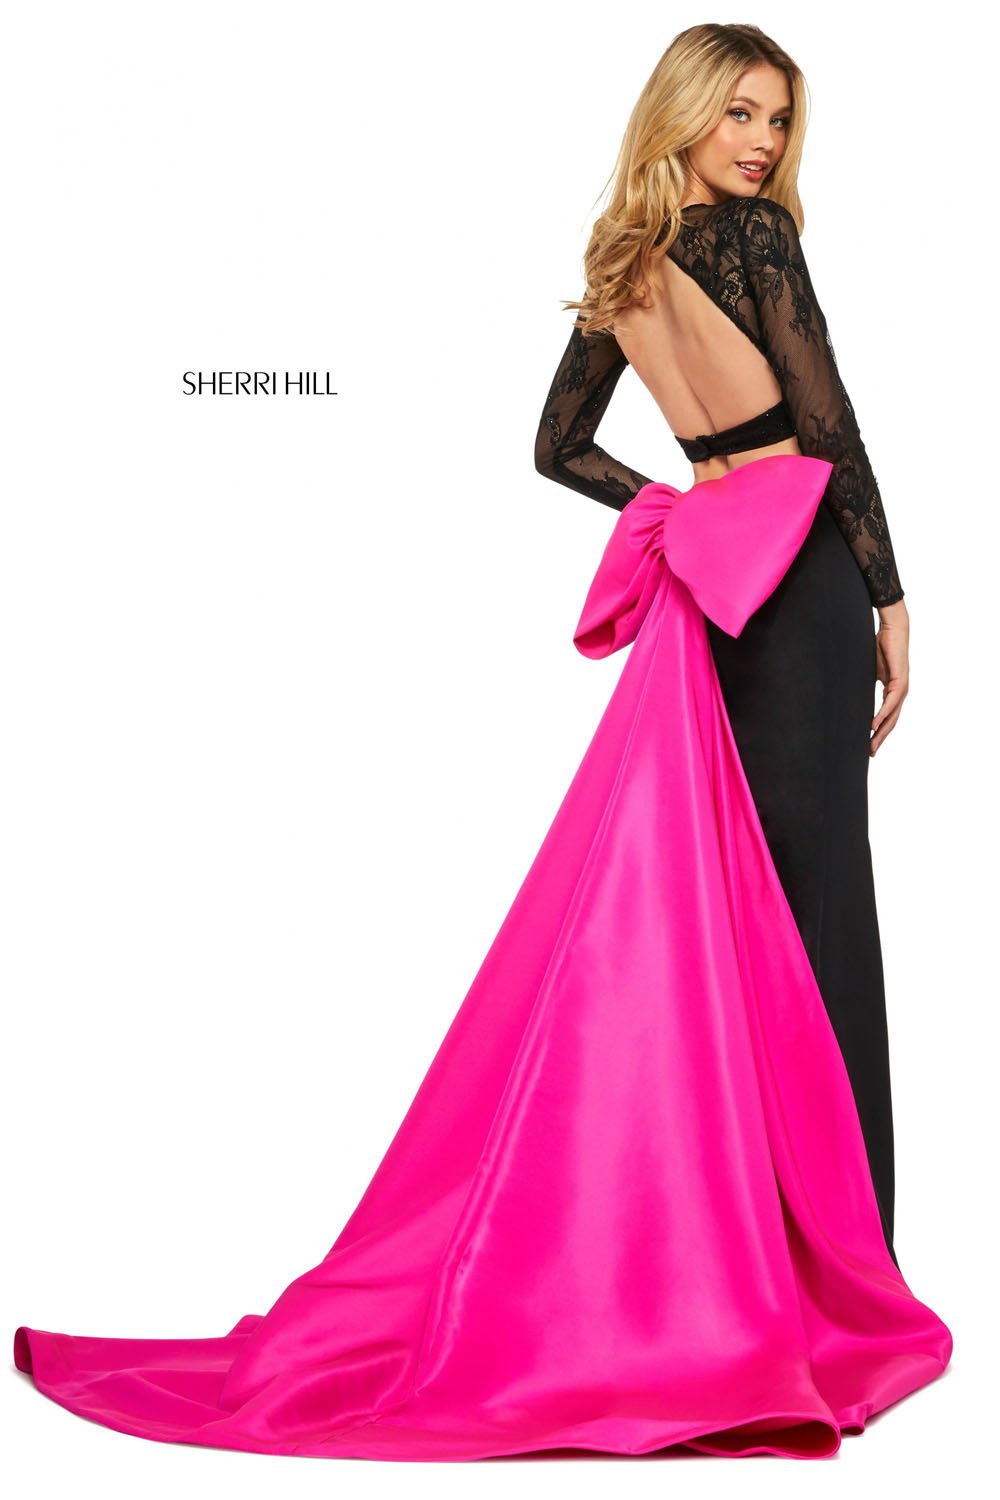 Sherri Hill 53463 dress images in these colors: Black Red, Black Fuchsia.